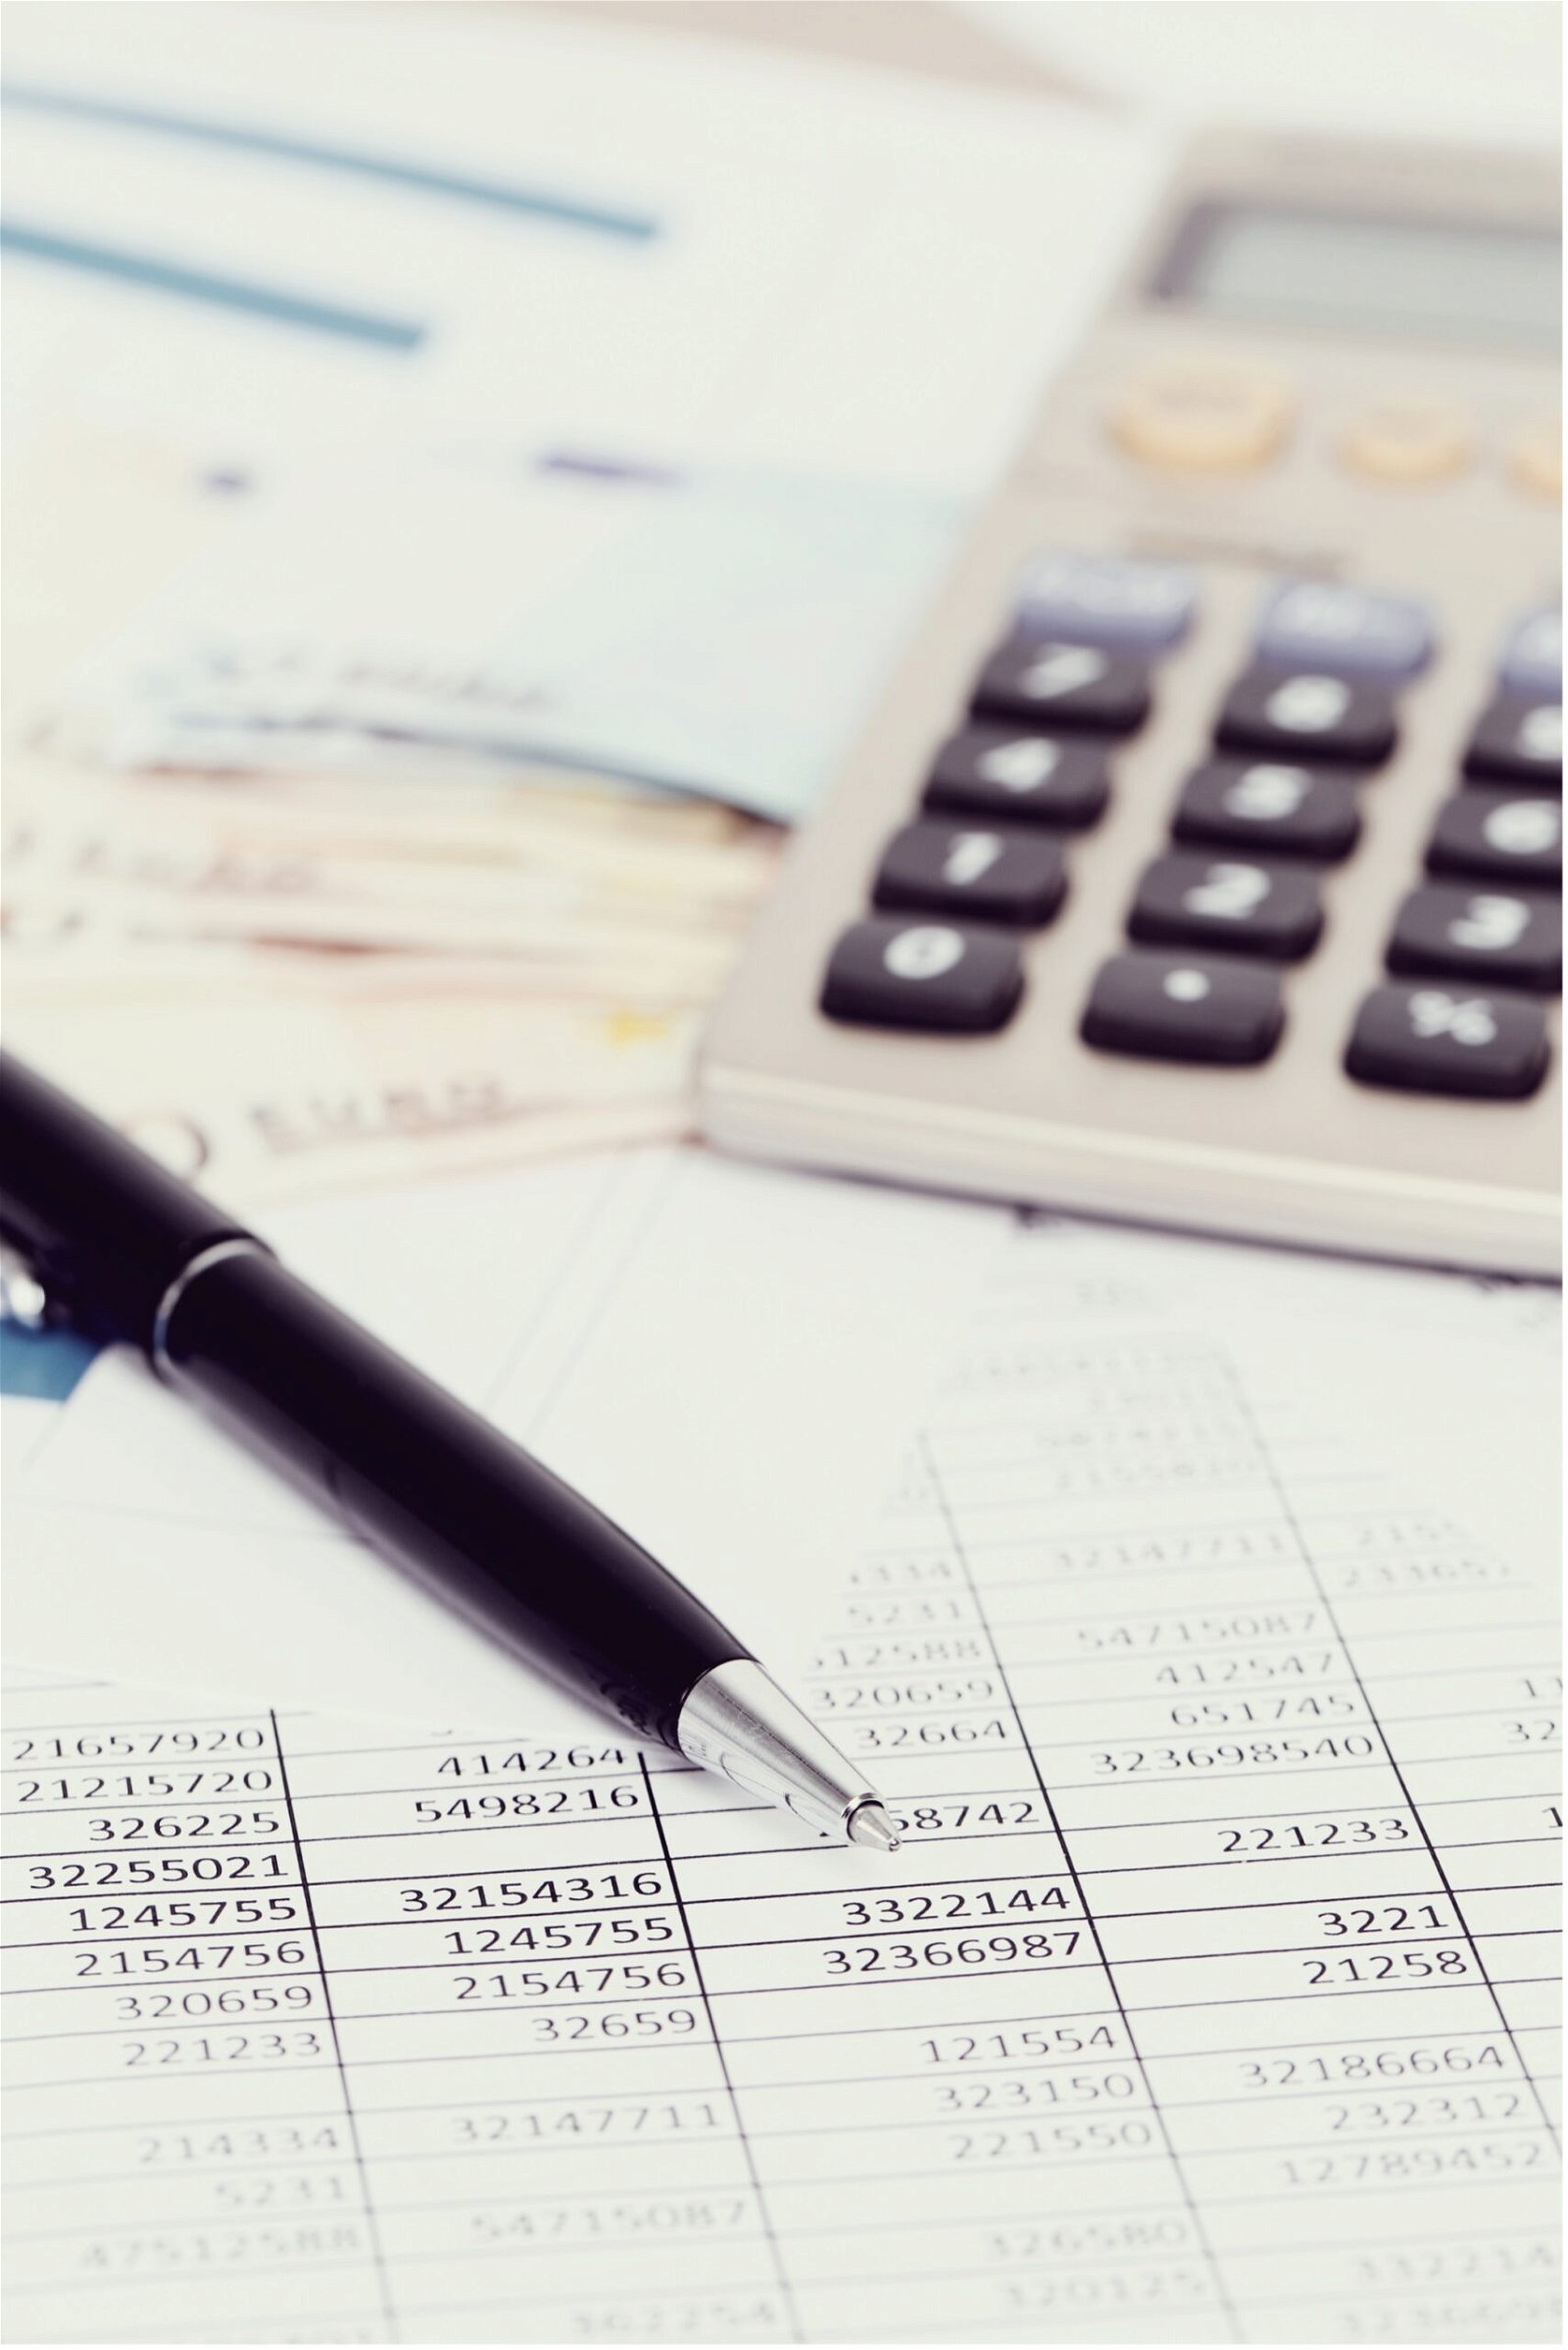 A closeup of a business' financial balance sheet with a pen and calculator resting on top.